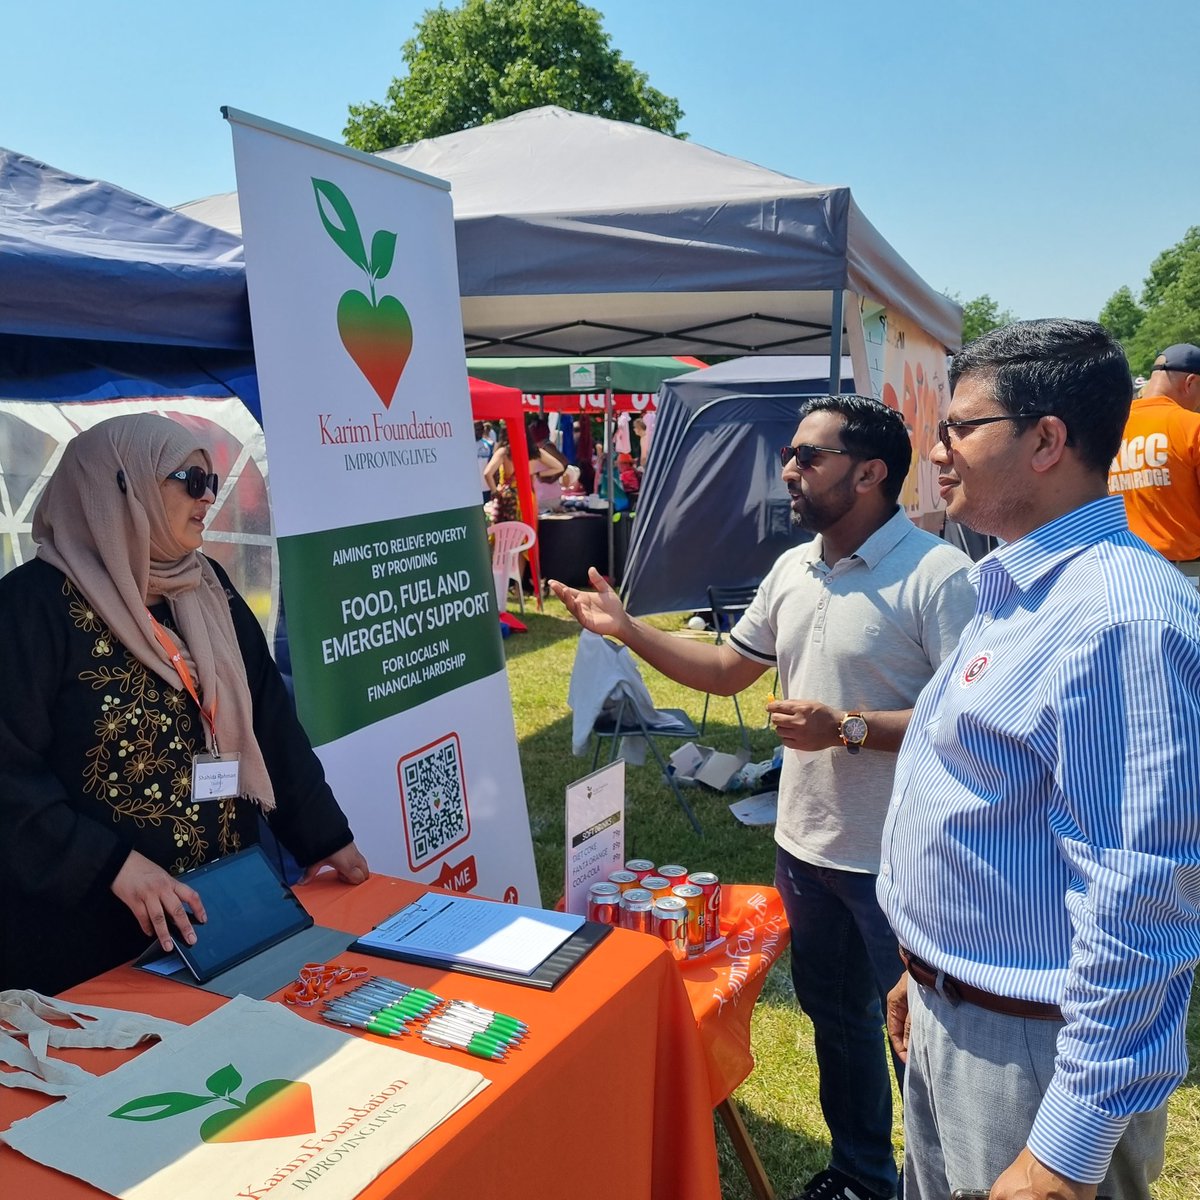 We had a fantastic time at this year's @ArburyCarnival! 😎 It was a very hot Saturday in Cambridge – perfect for hats, sunglasses, and ice cream! ☀️ Big thanks to everyone who visited our stall to learn more about our work, we always love meeting new and familiar faces ❤️